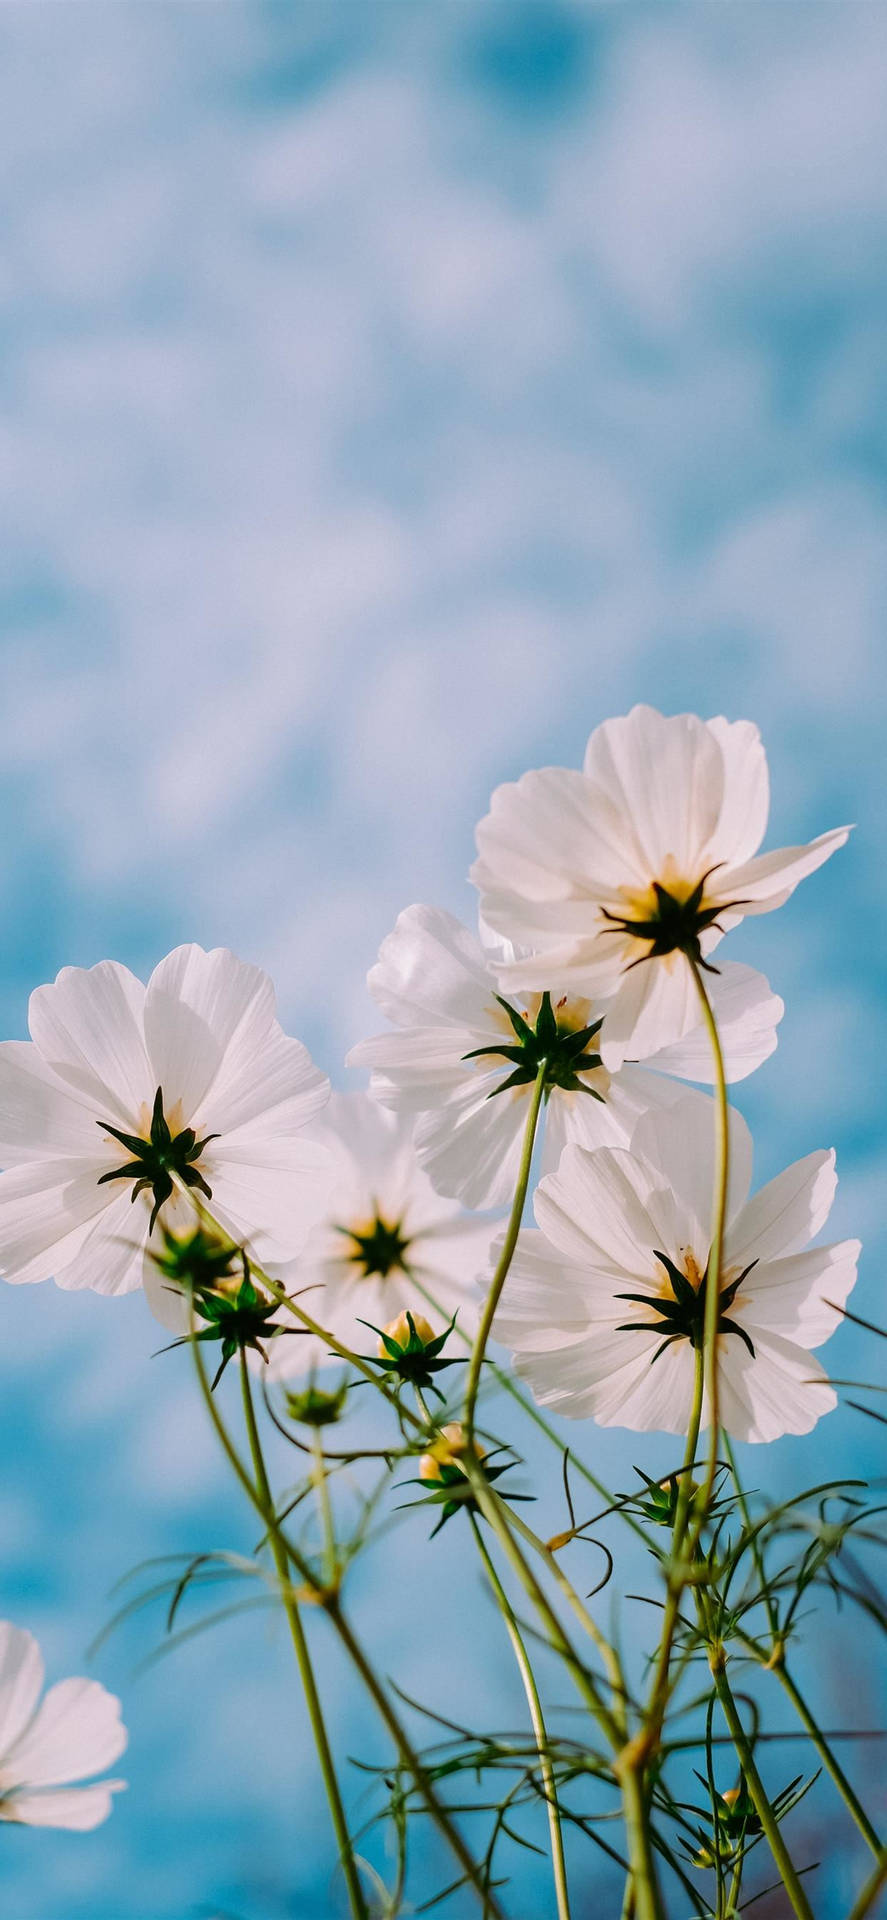 Spring Flowers iPhone 11 Pro Max Wallpaper